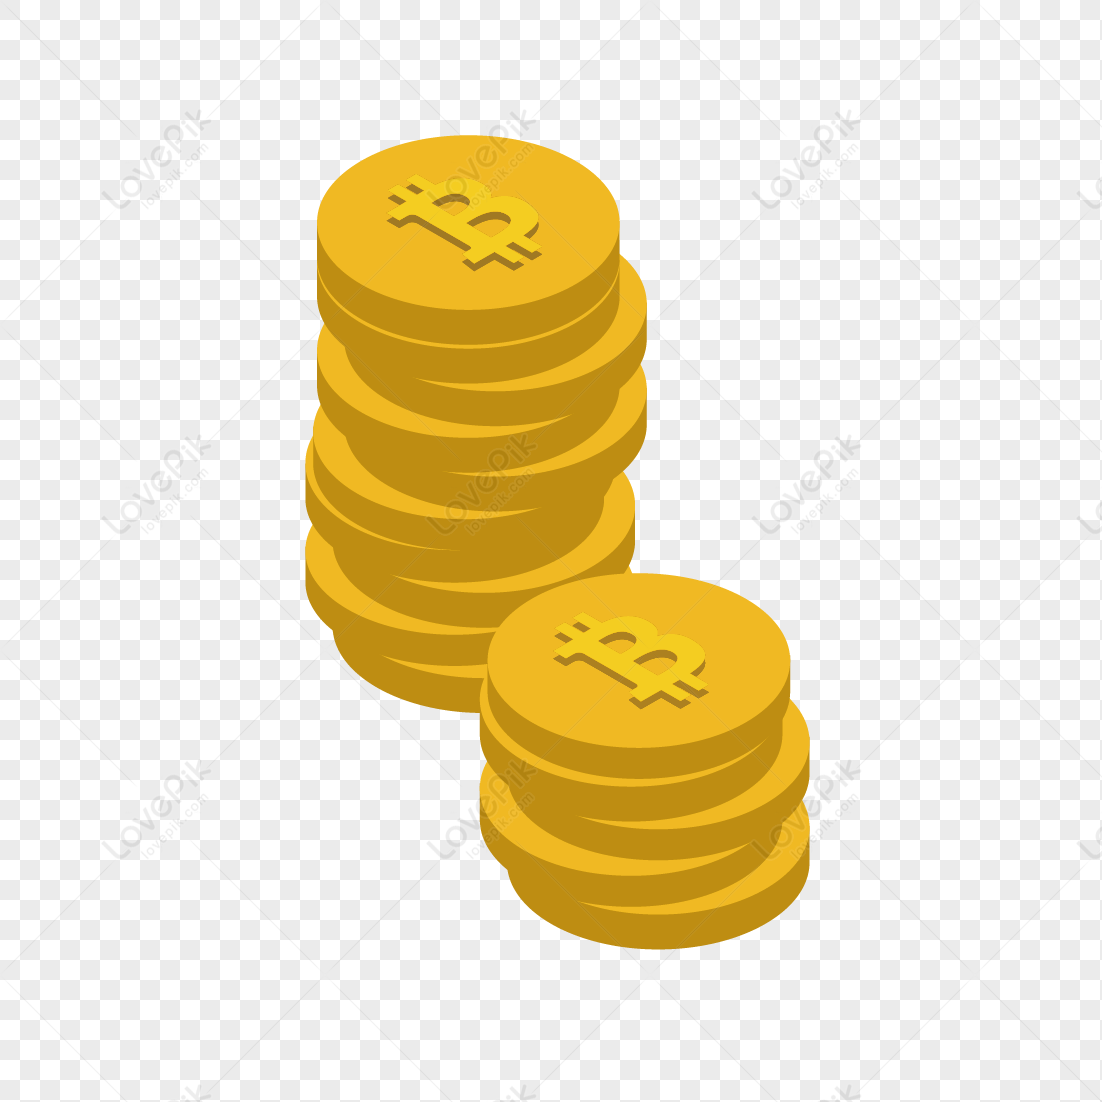 Gold Coin PNG White Transparent And Clipart Image For Free Download ...